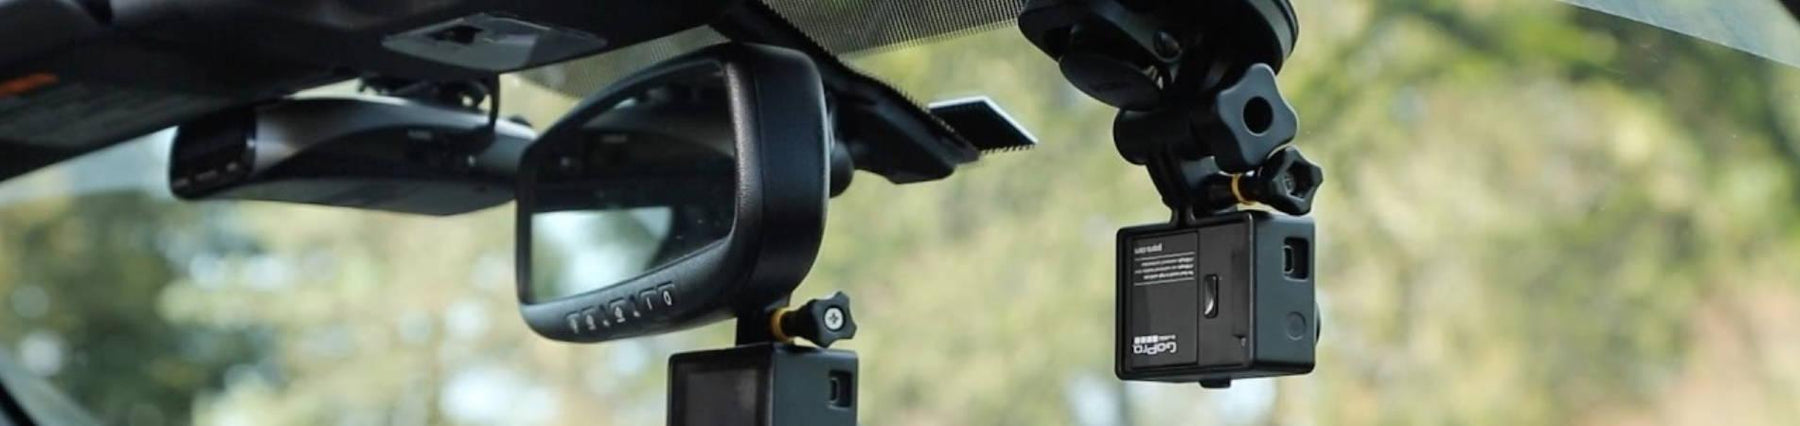 6 Reasons Why You Shouldn’t Use Your GoPro as a Dash Cam - - BlackboxMyCar Canada